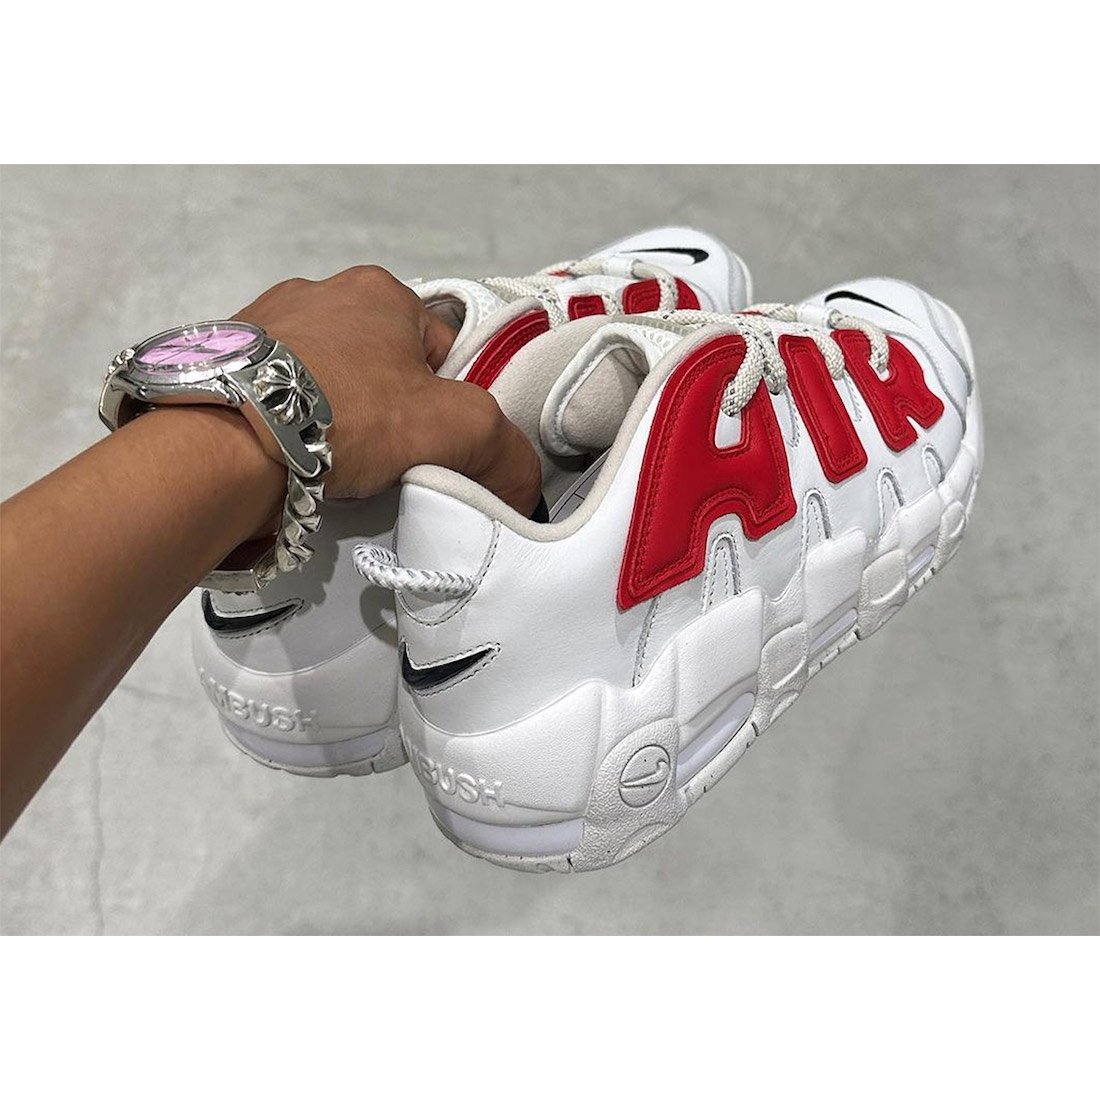 Yoon Teases Ambush x Nike Air More Uptempo in “White/Red”